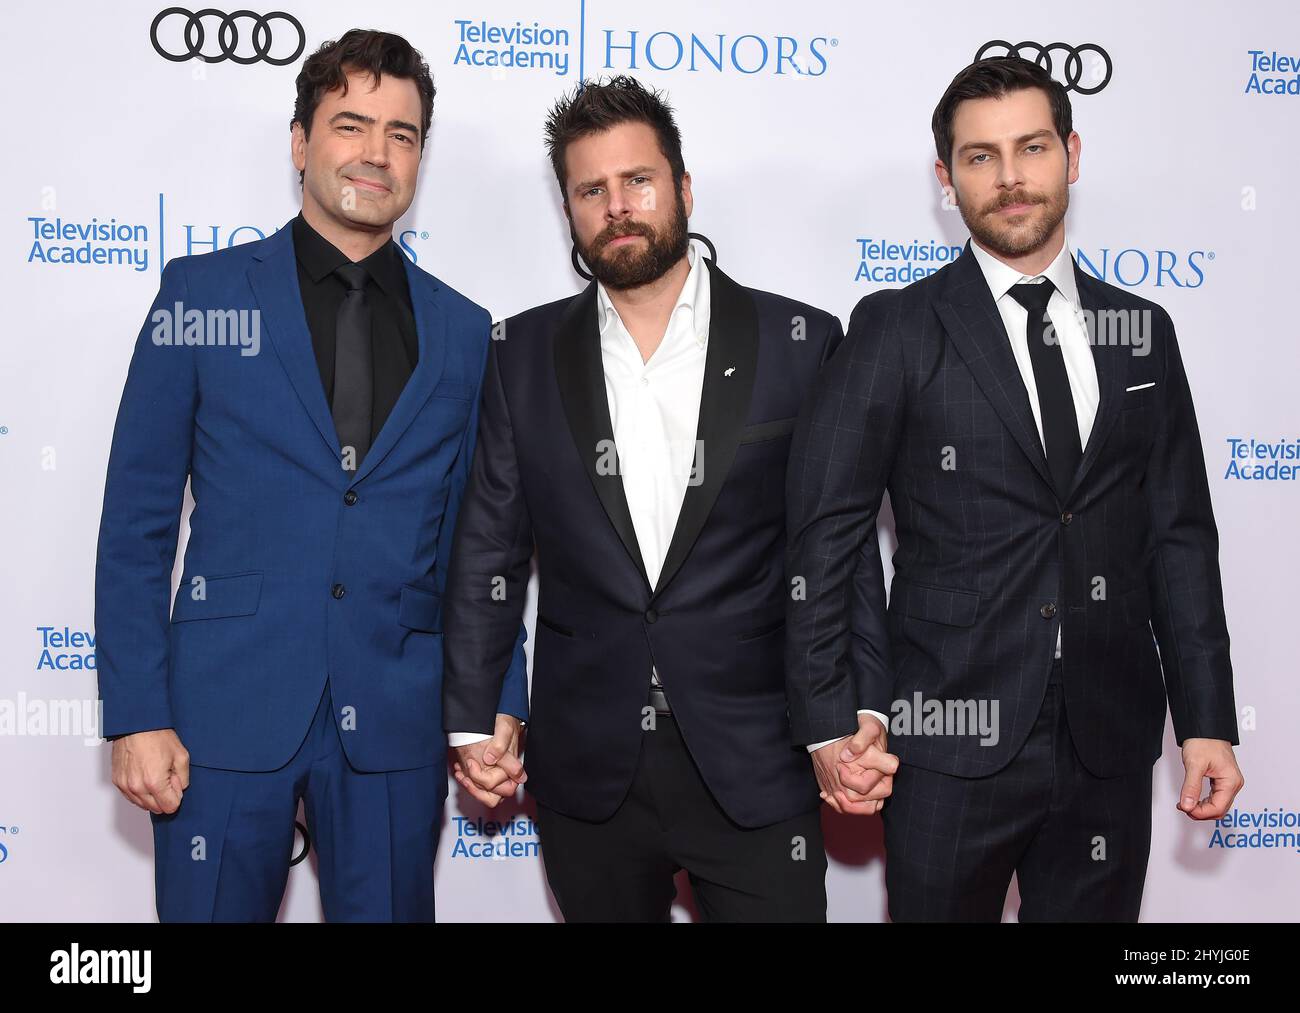 Ron Livingston, James Roday and David Giuntoli attending the Television Academy Honors at Wilshire Hotel on May 30, 2019 in Los Angeles, CA Stock Photo